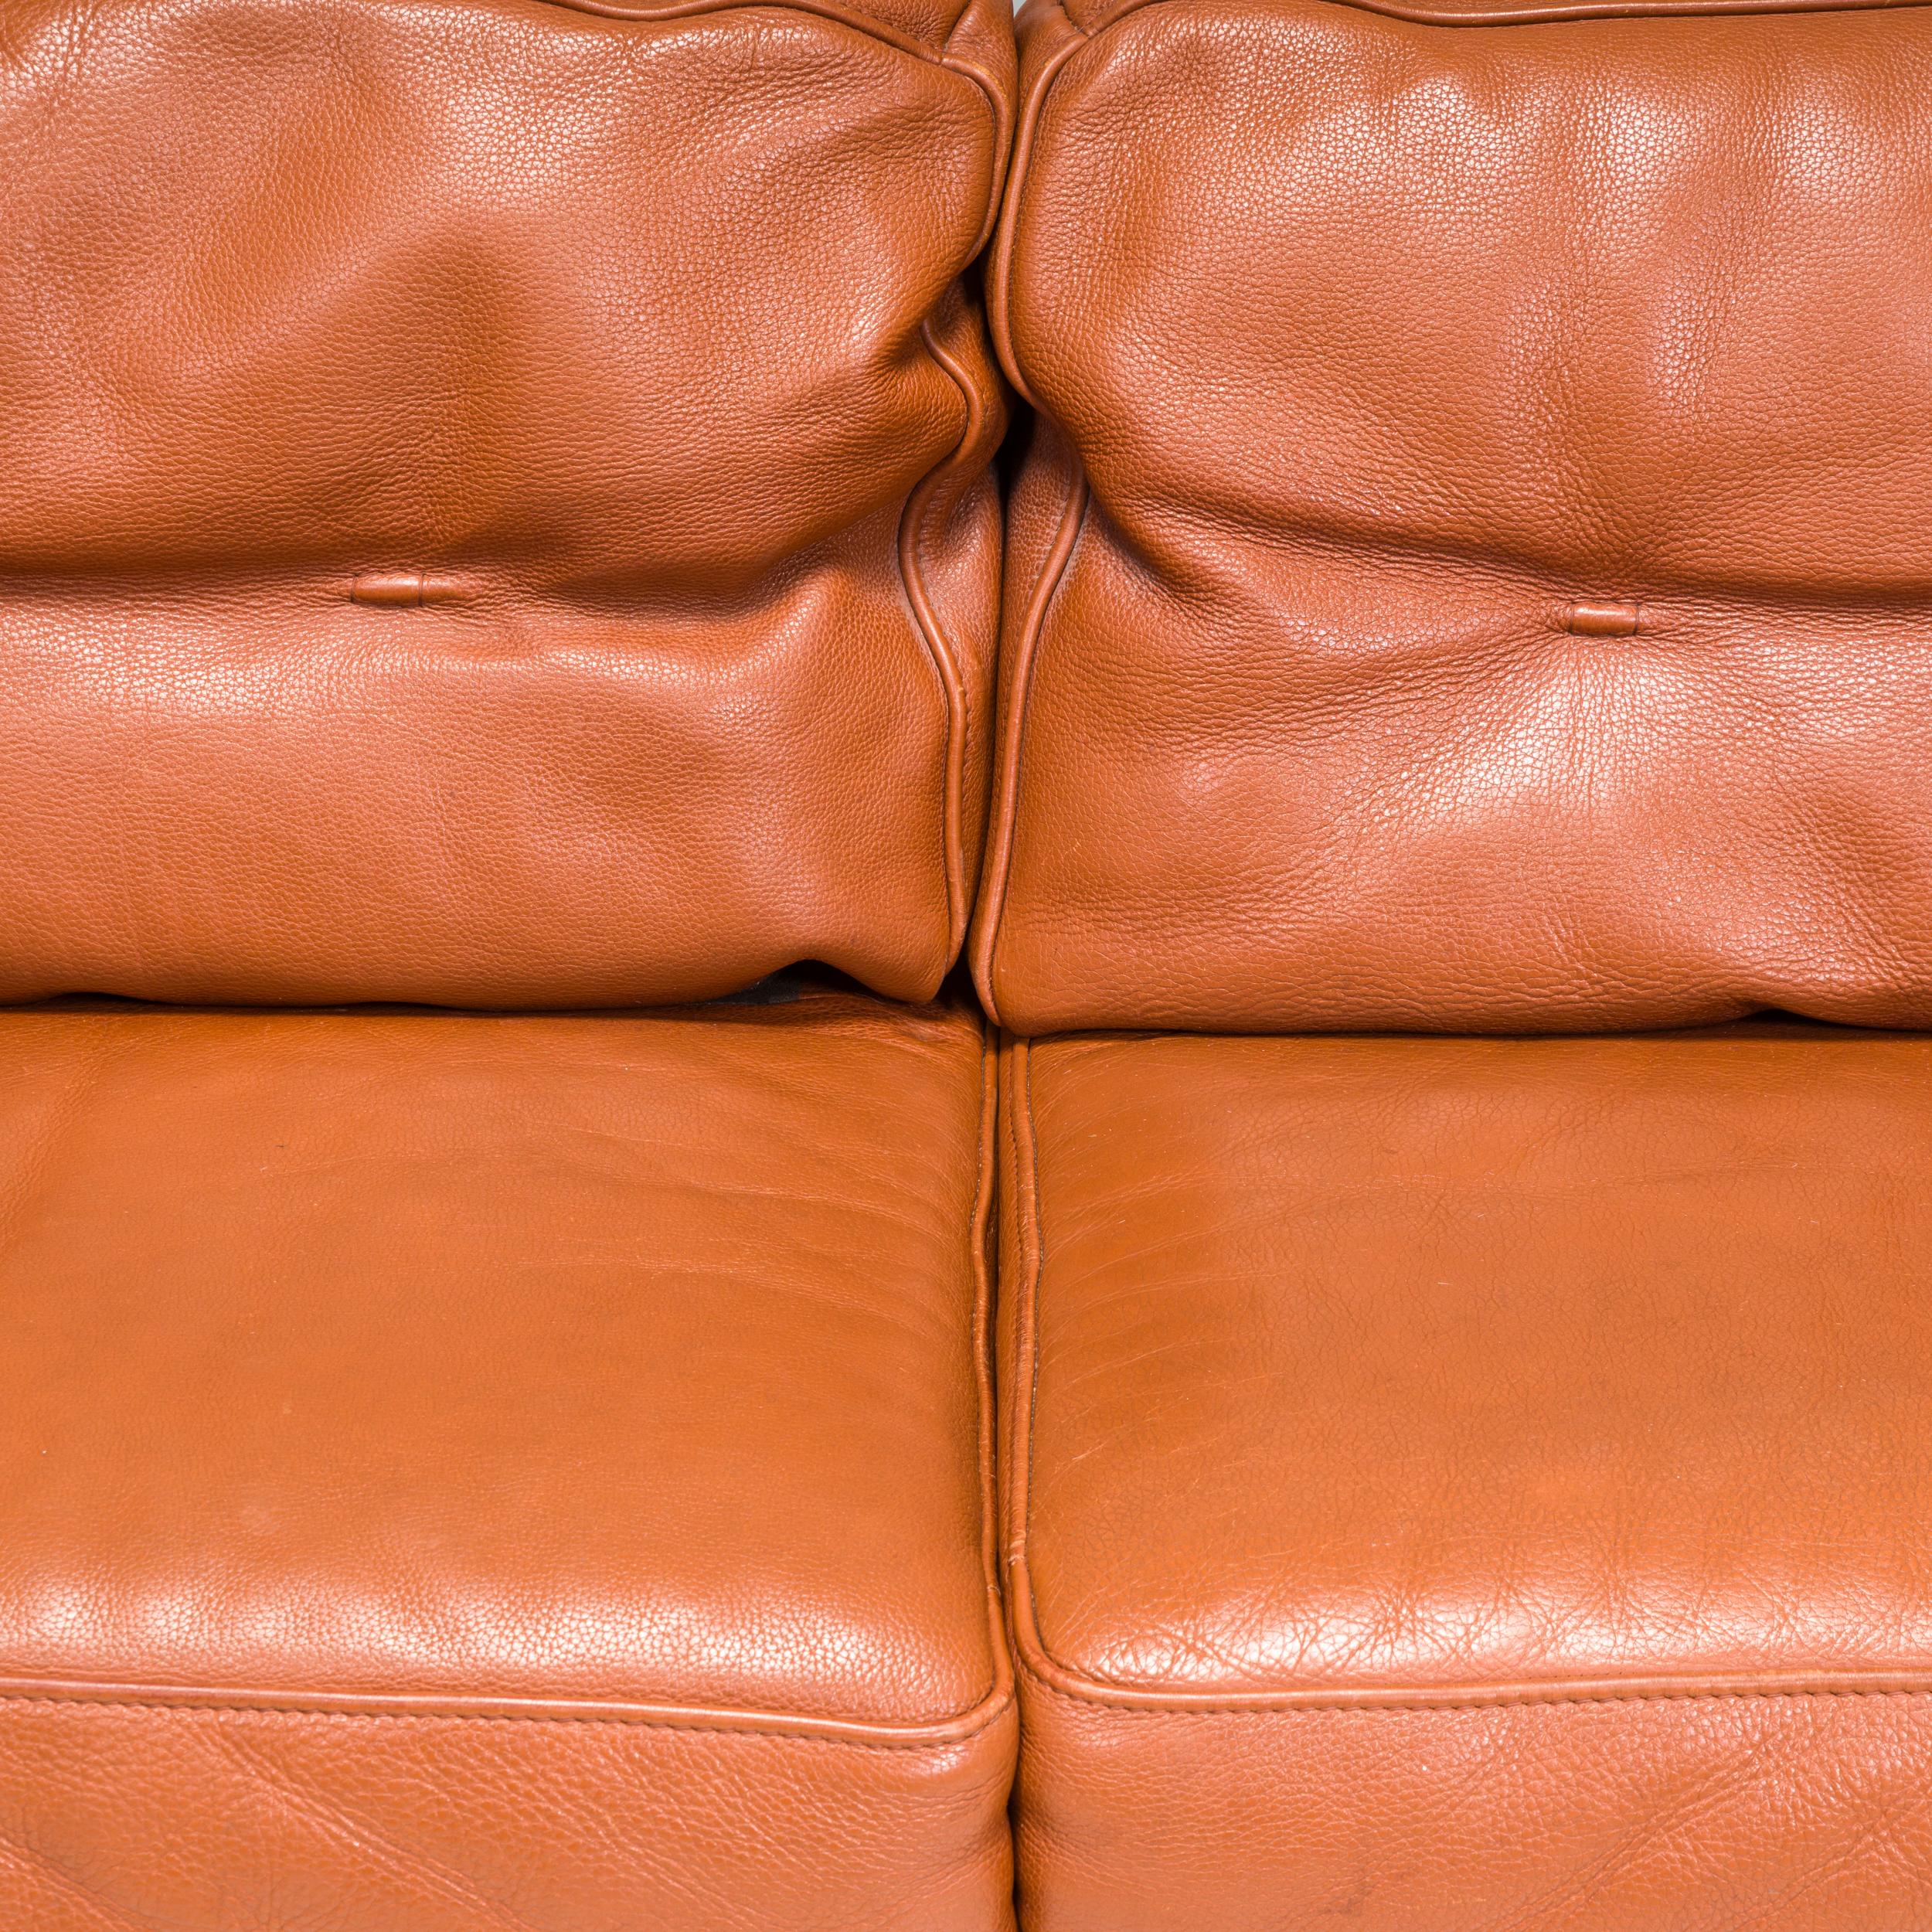 Roche Bobois Brown Leather Sofa, Three Seater For Sale 2